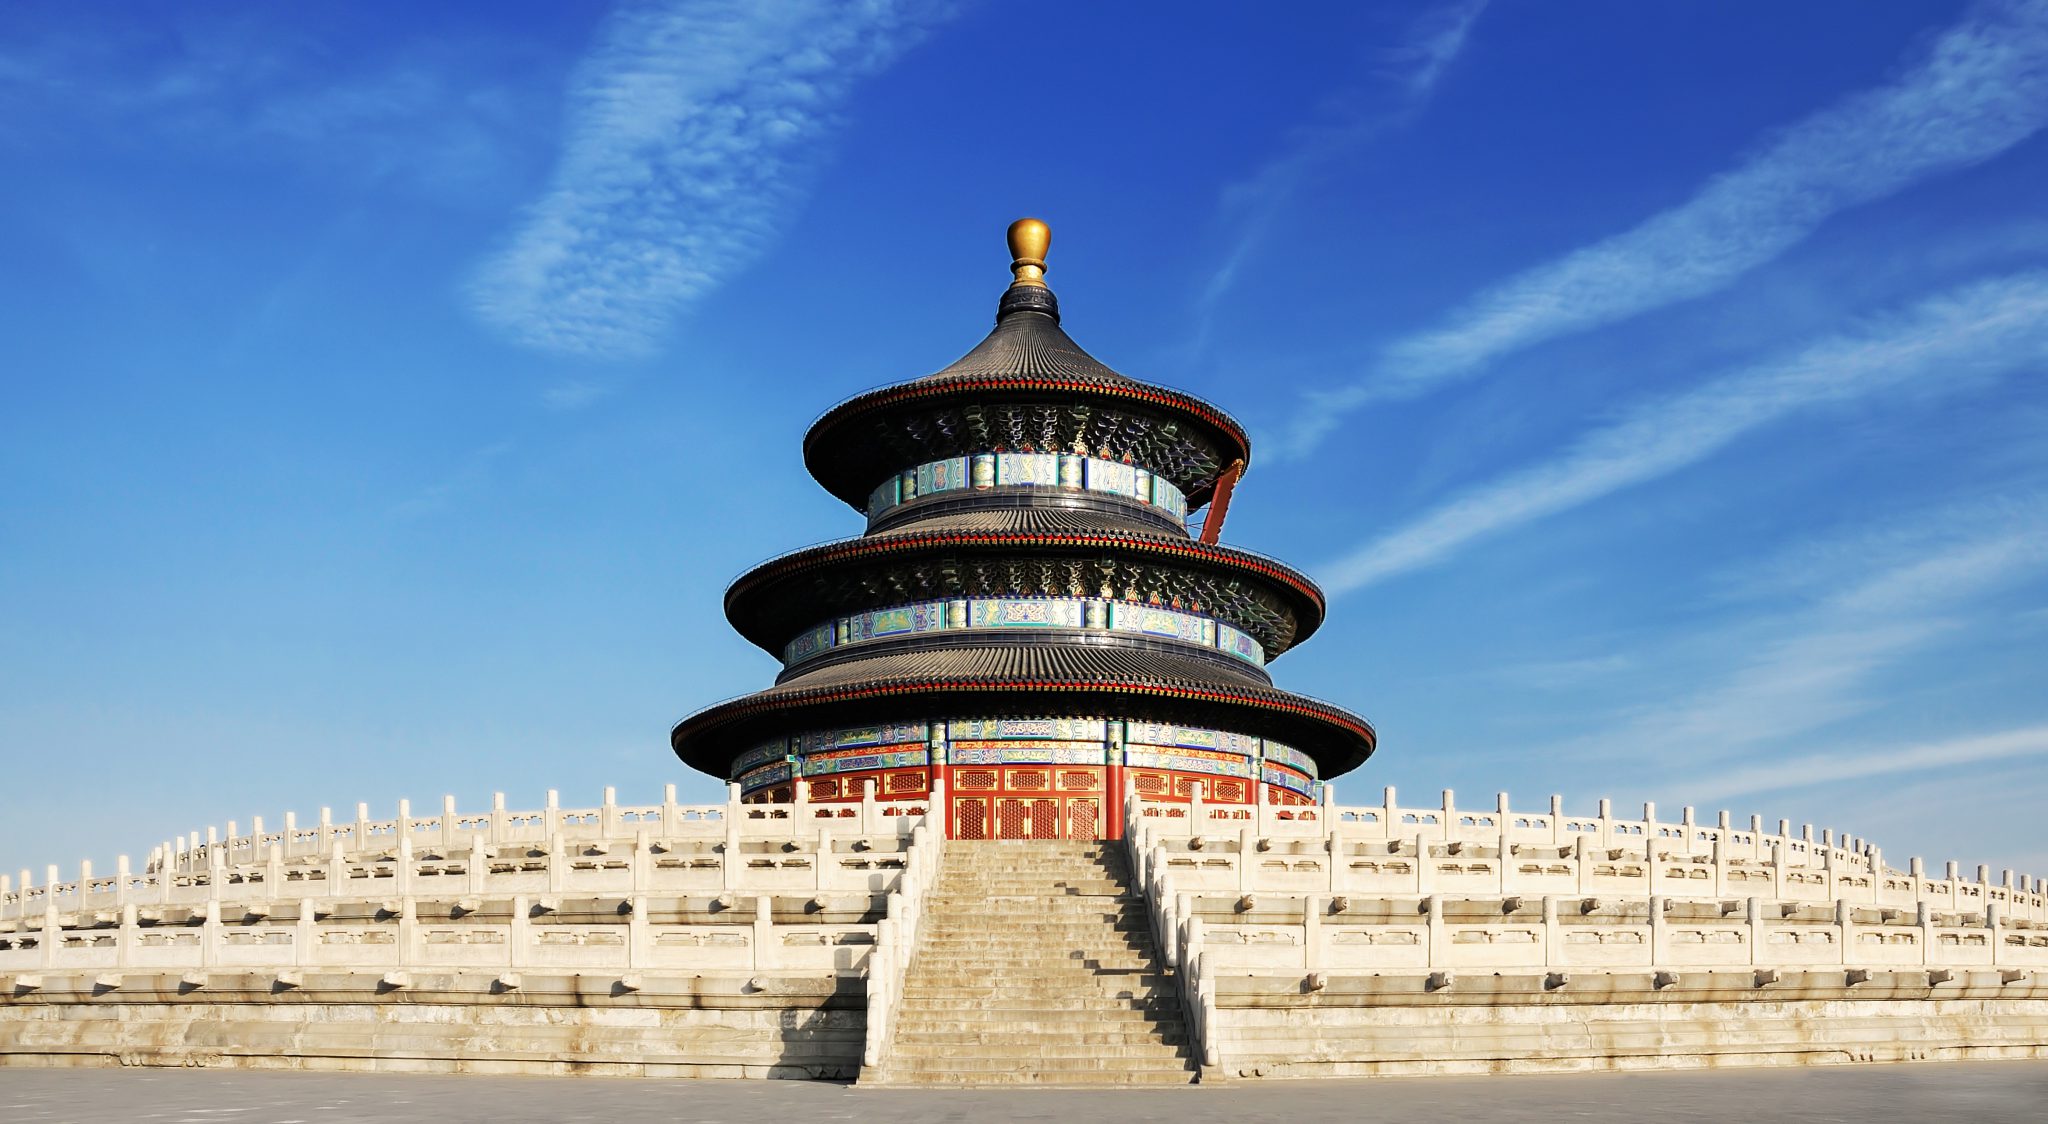 http://www.dreamstime.com/stock-images-temple-heaven-image4383074